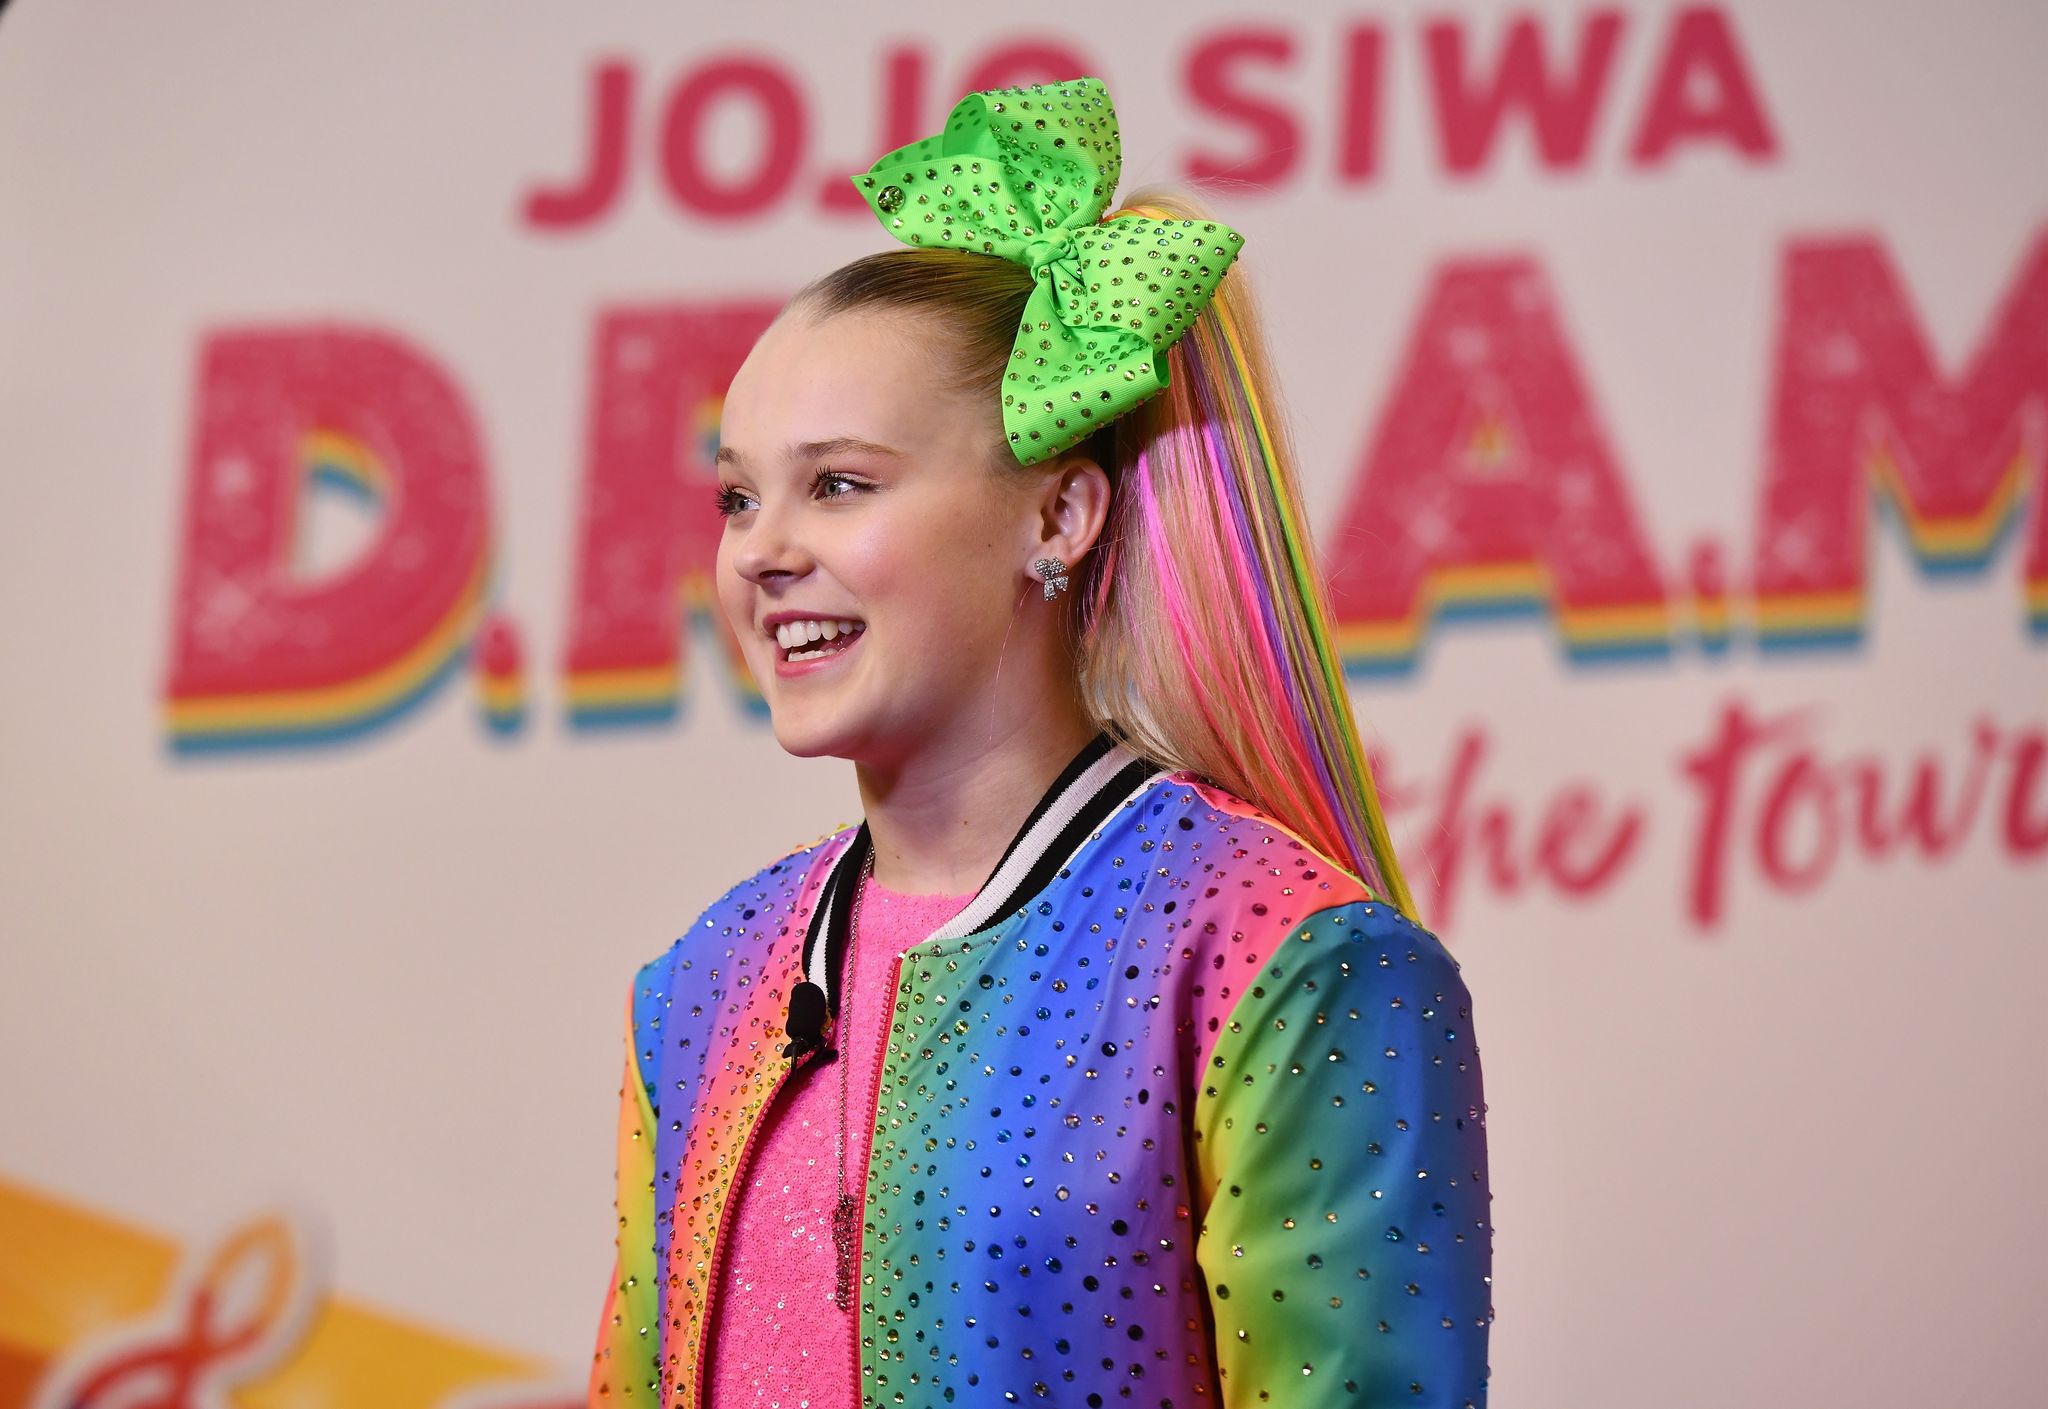 JoJo Siwa announces her upcoming EP and D.R.E.A.M. Tour at Sugar Factory on November 7, 2018 in New York, NY. | Photo: Getty Images